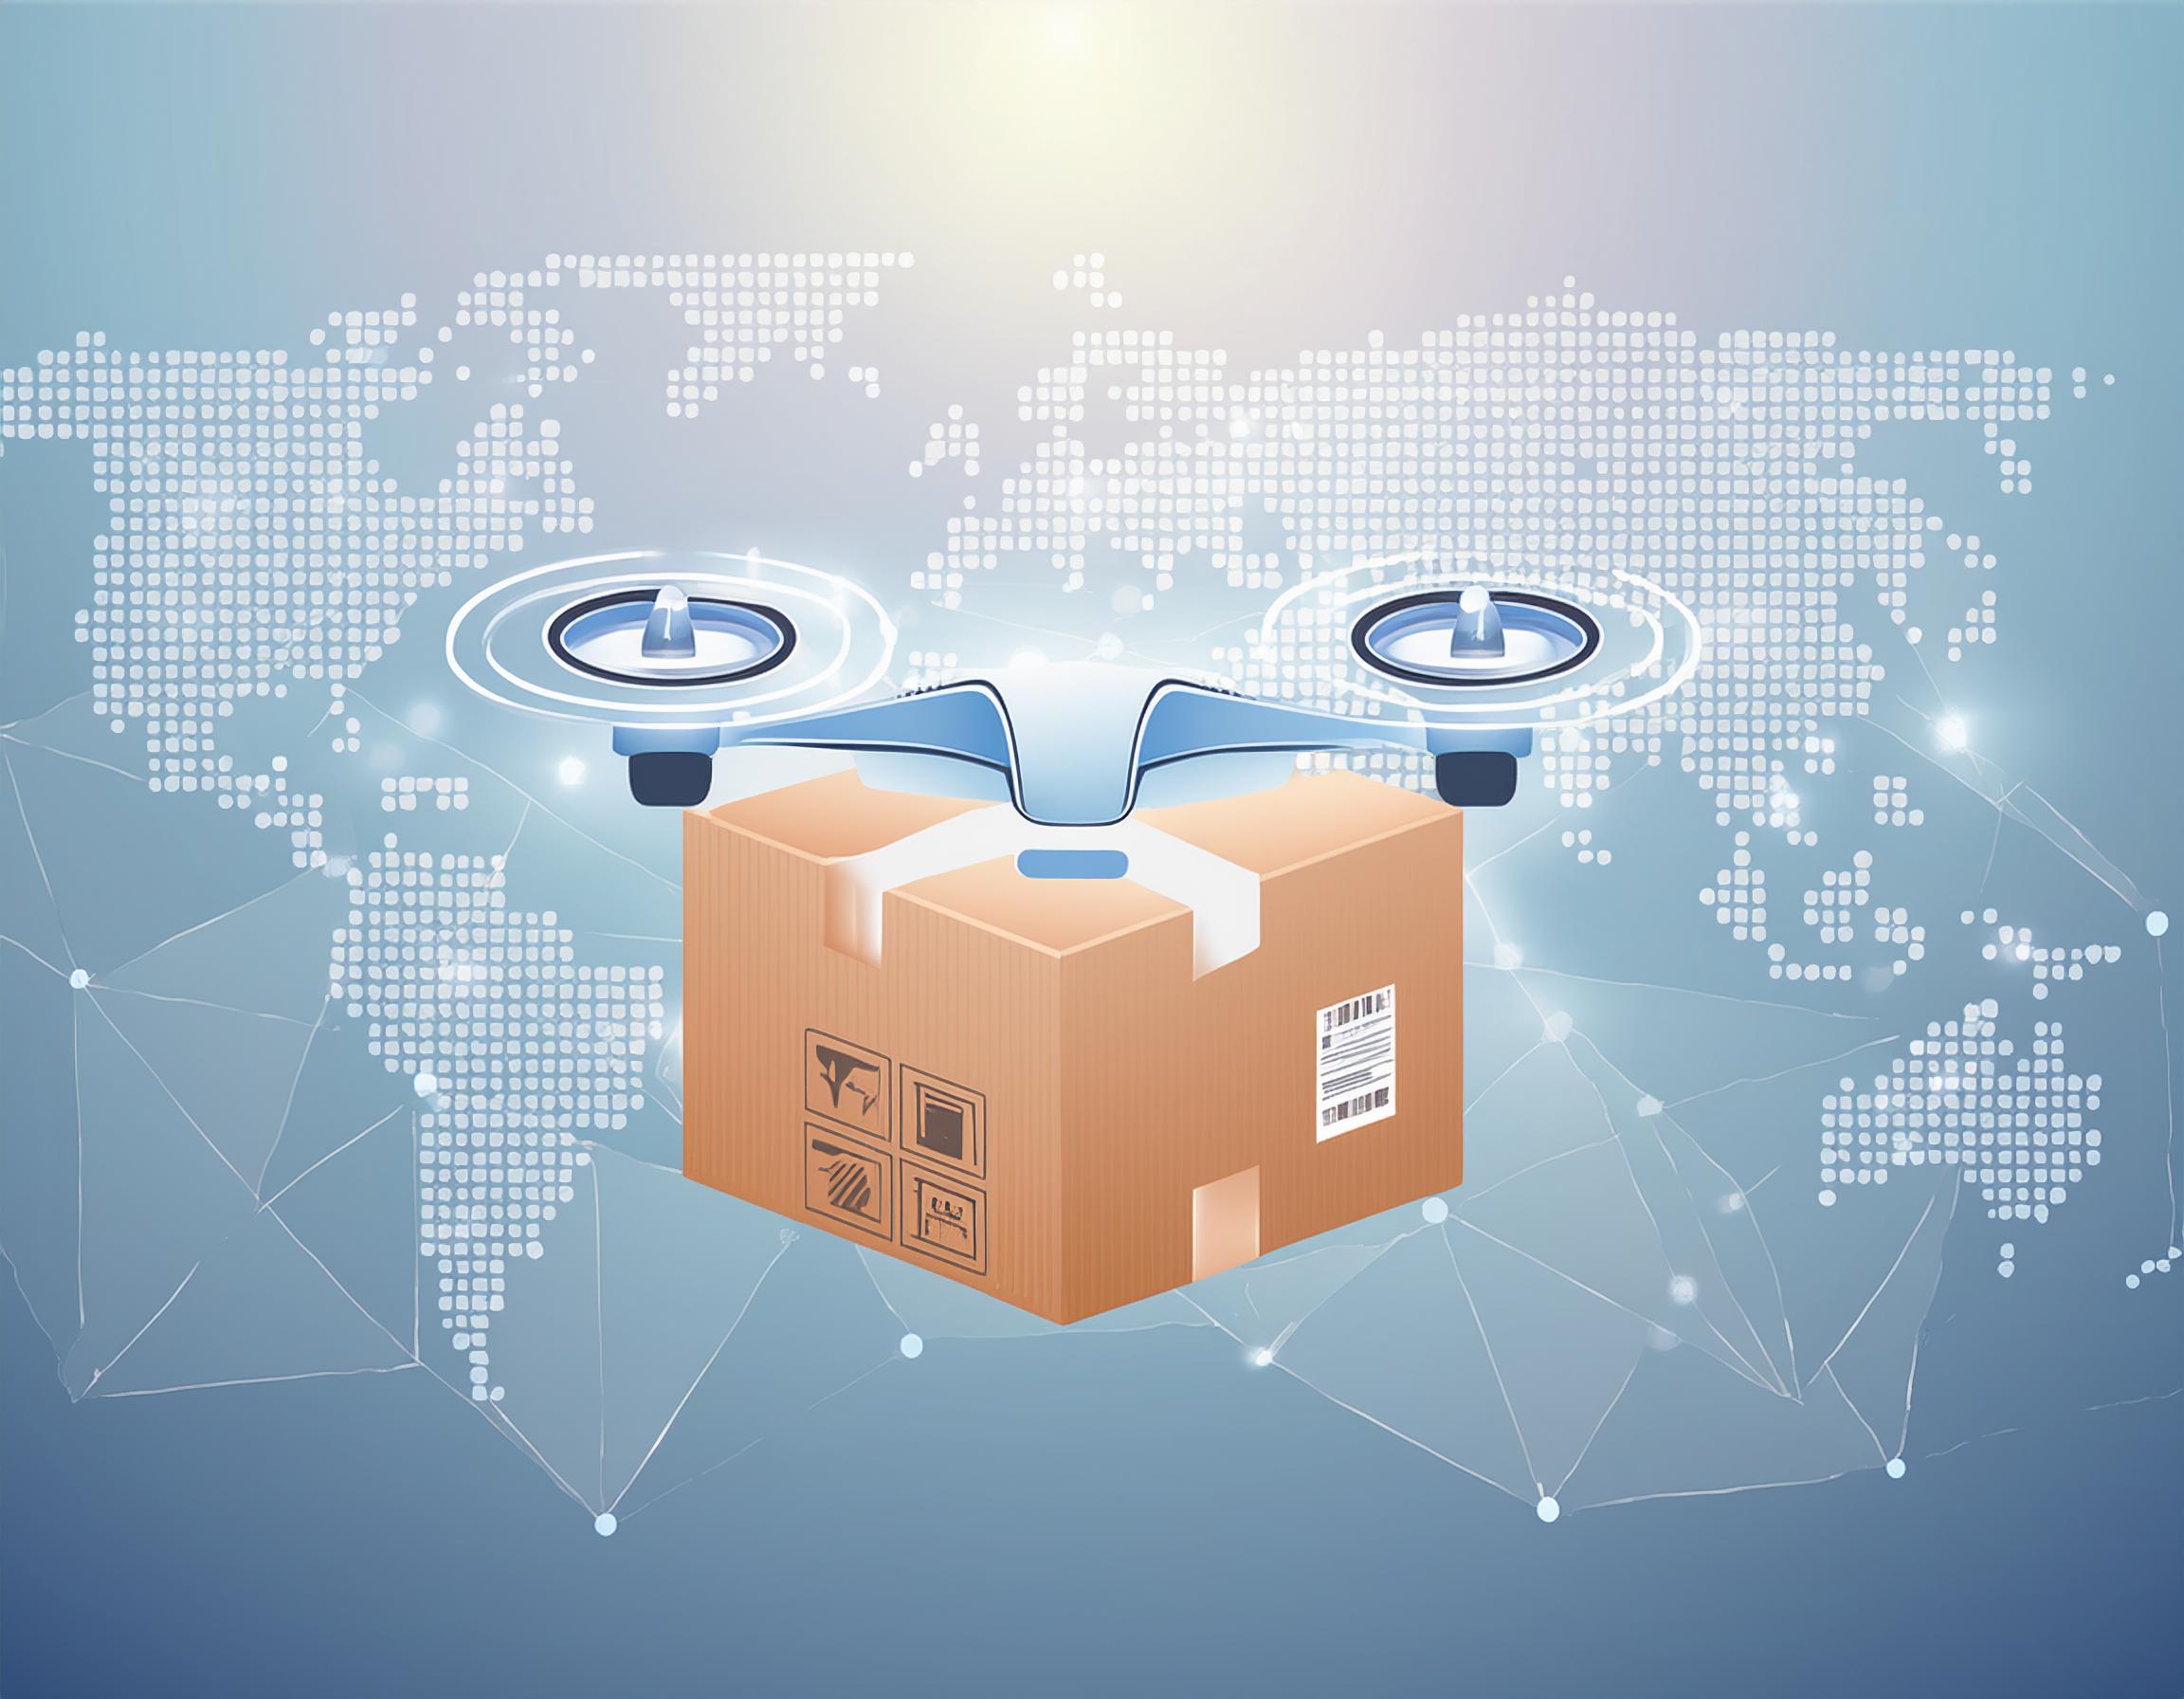 A futuristic image depicting drones, augmented reality glasses, blockchain symbols, and artificial intelligence algorithms, representing the innovations shaping the future of parcel forwarding